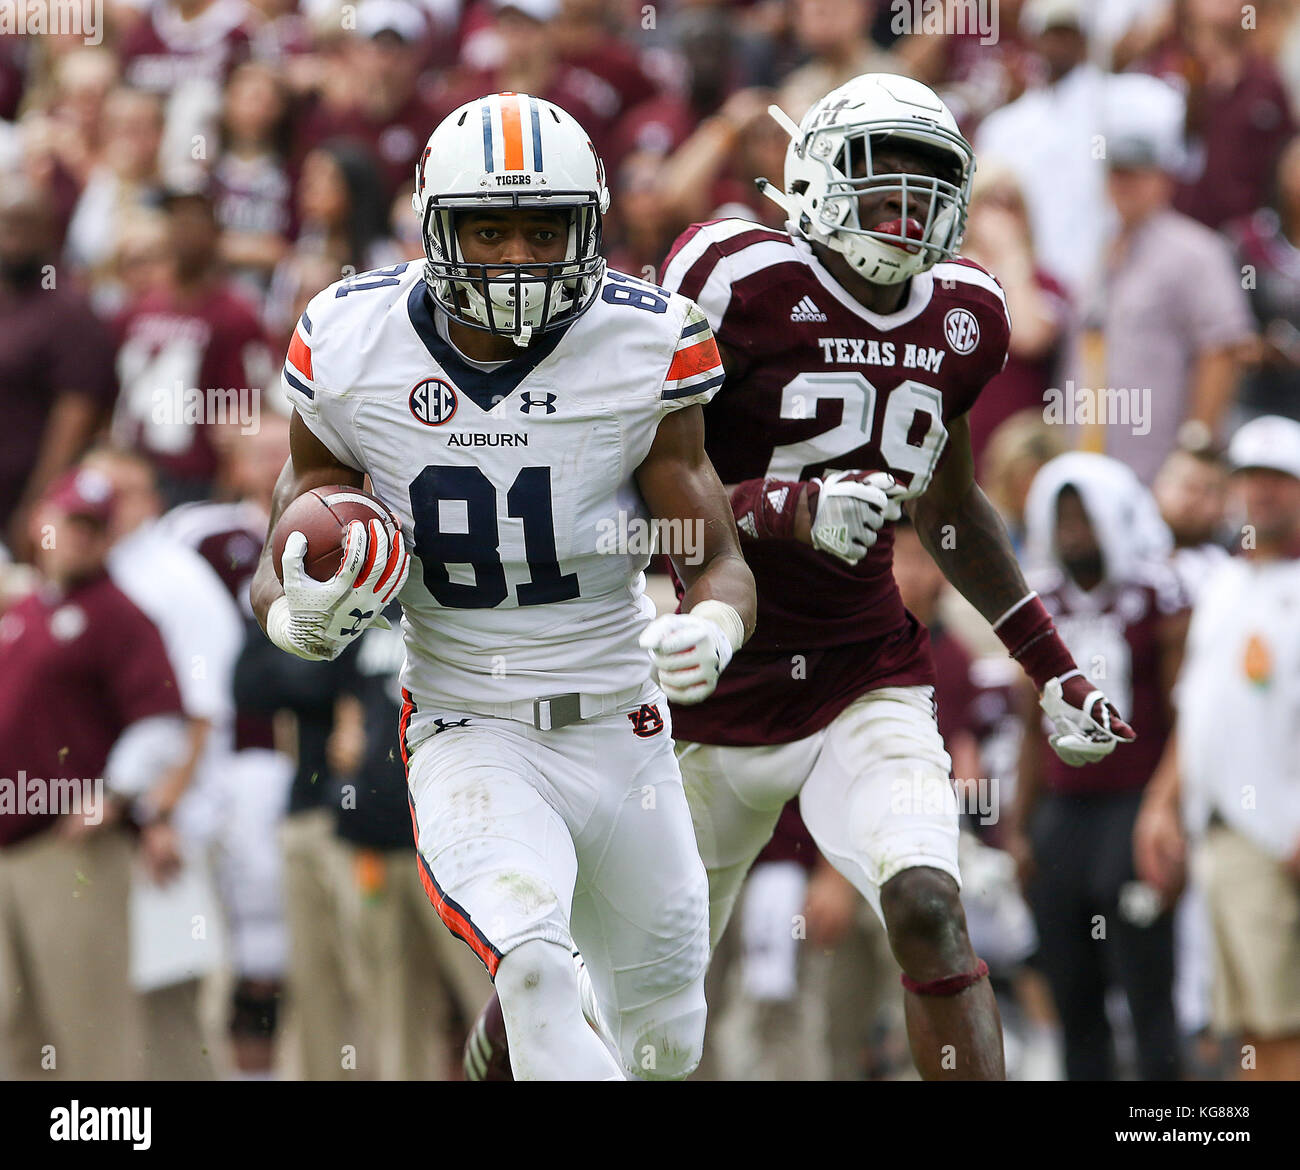 November 4, 2017: Auburn Tigers wide receiver Darius Slayton (81) runs for a 53 yard touchdown pass in the second quarter during the NCAA football game between the Auburn Tigers and the Texas A&M Aggies at Kyle Field in College Station, TX; John Glaser/CSM. Stock Photo